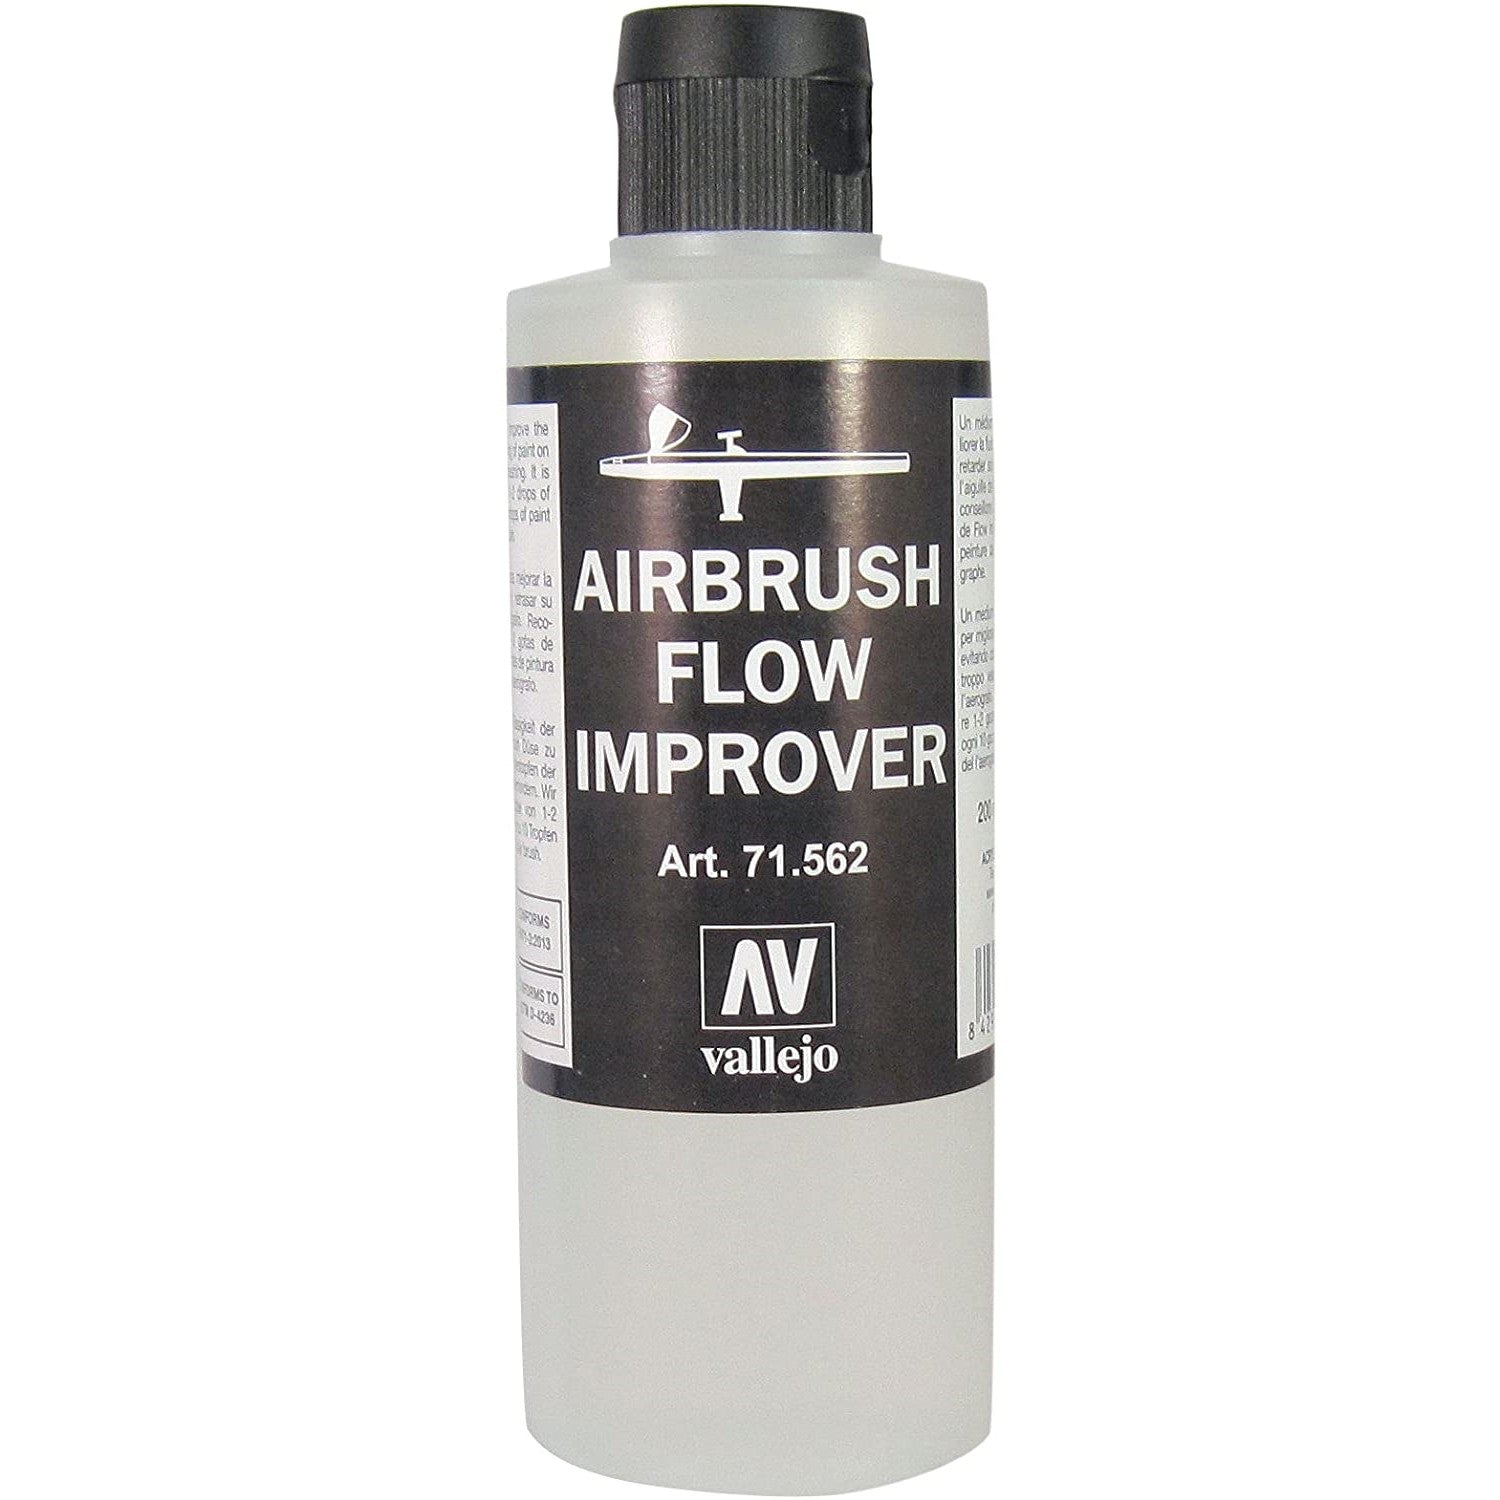 Vallejo Auxiliary 200ml Airbrush Flow Improver